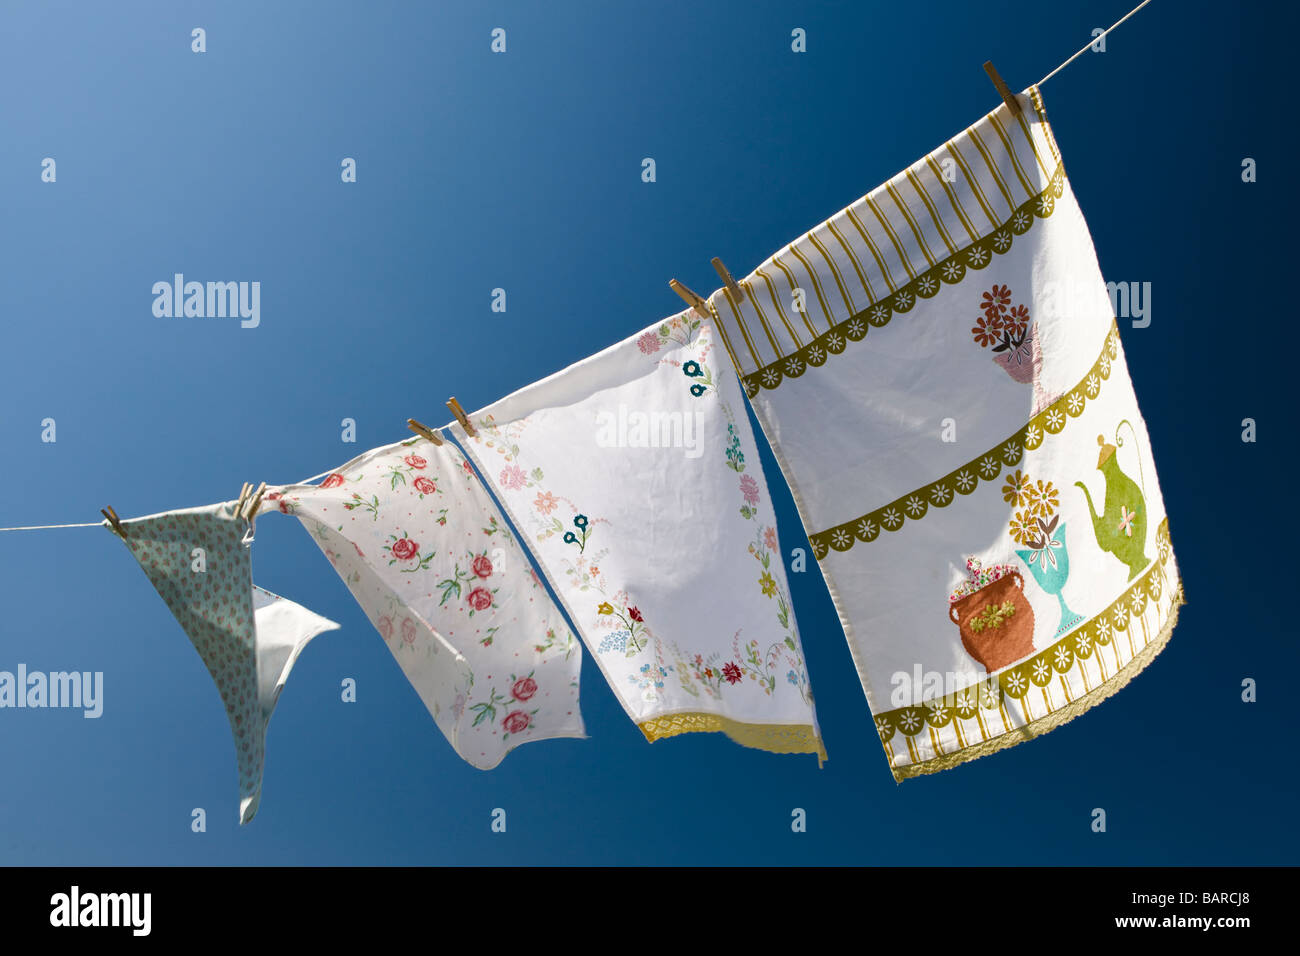 Environmentally friendly: Colorful washing, drying in the wind under a deep blue sky. Stock Photo